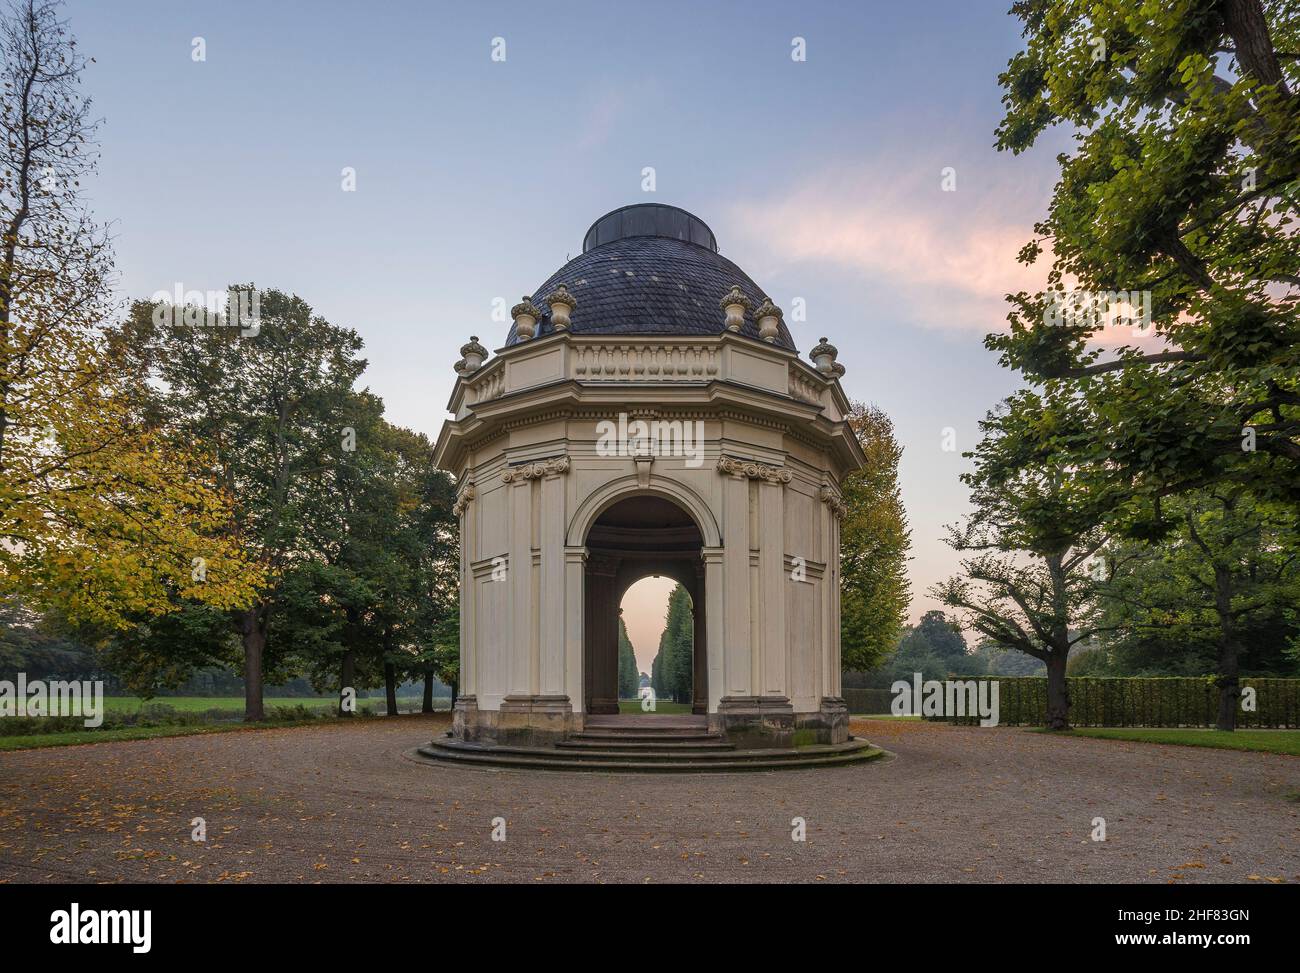 Germany,  Lower Saxony,  Hanover,  pavilion / temple Remy de la Fosse of the Herrenhausen Gardens in the evening Stock Photo